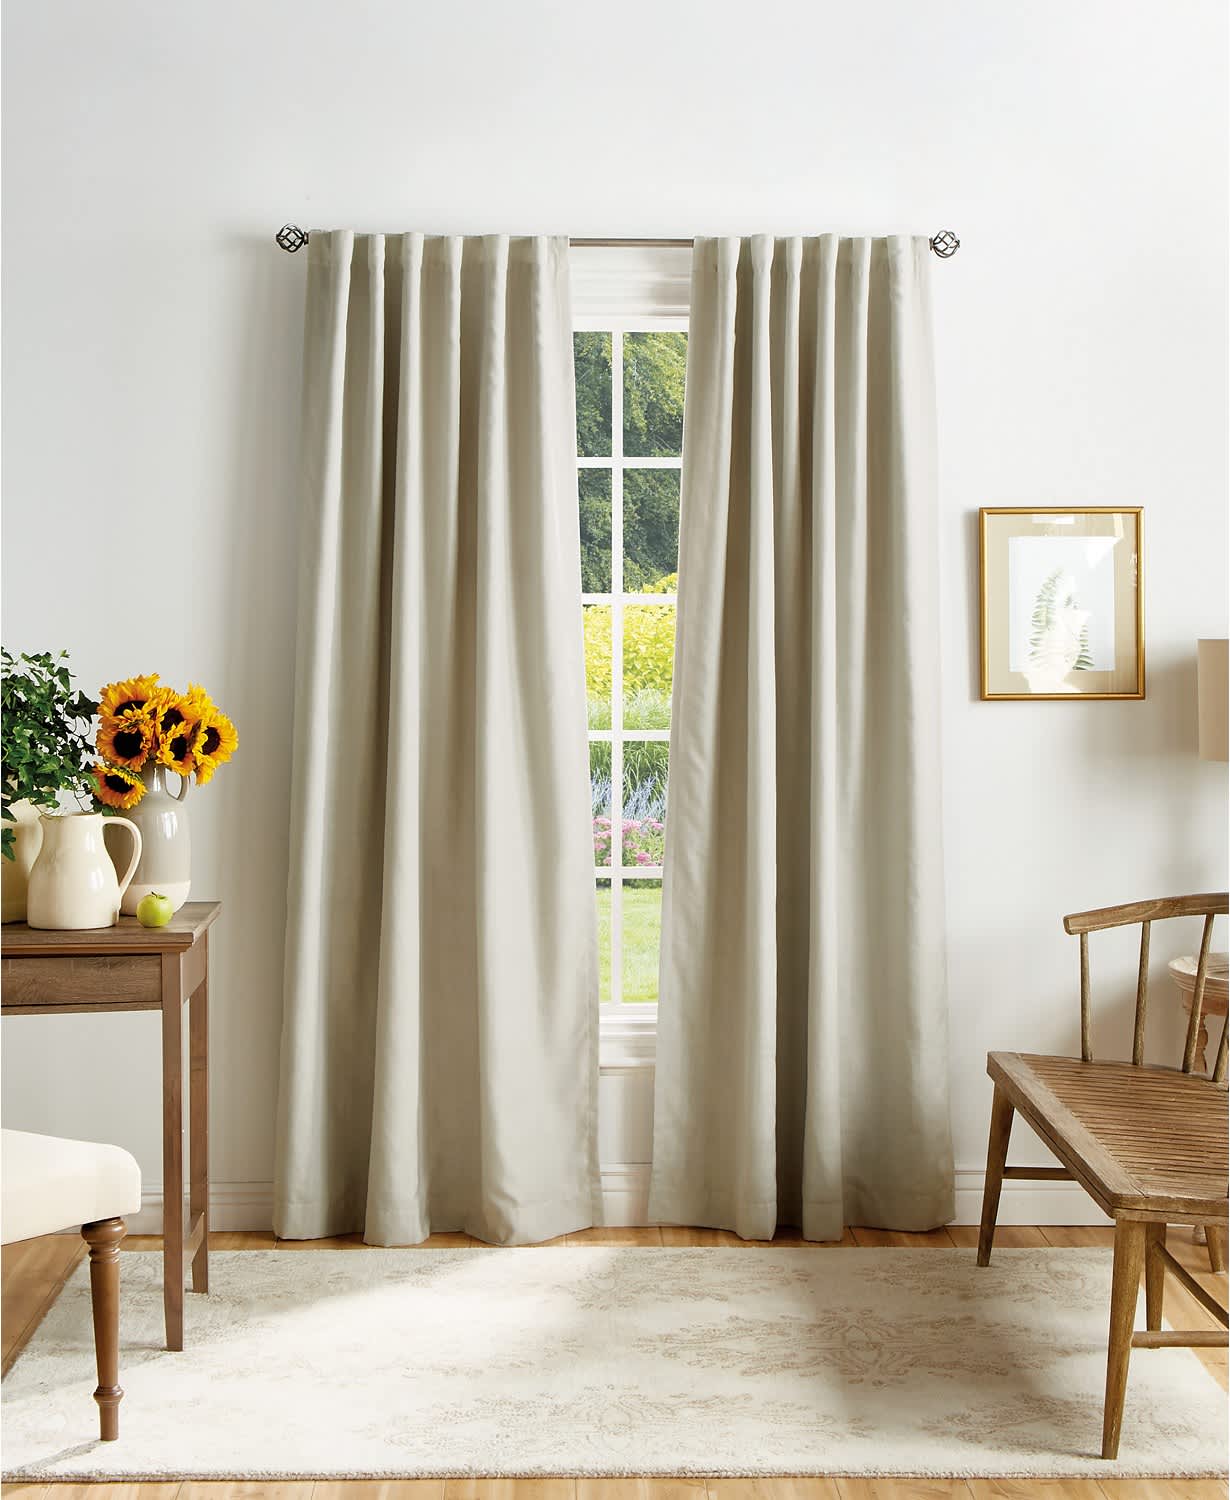 52 x 95 inch Dark Grey Thermal Insulated Curtains Set of 2 Panels Sun Light Blocking Rod/Pole Pocket Window Drapes for Living Room LORDTEX Pom Pom Blackout Curtains for Bedroom